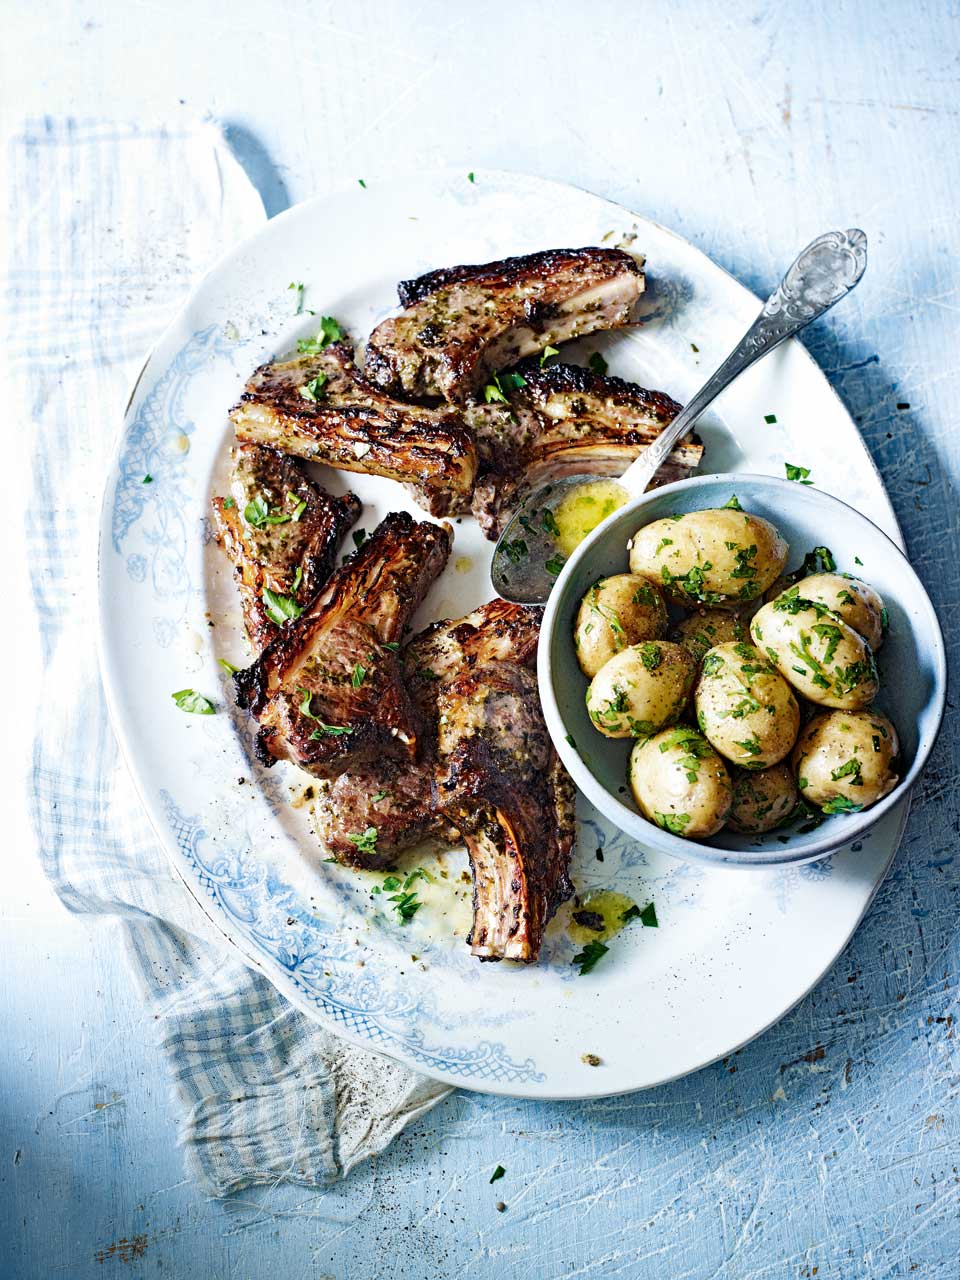 Lamb cutlets with jersey royals recipe | delicious. magazine